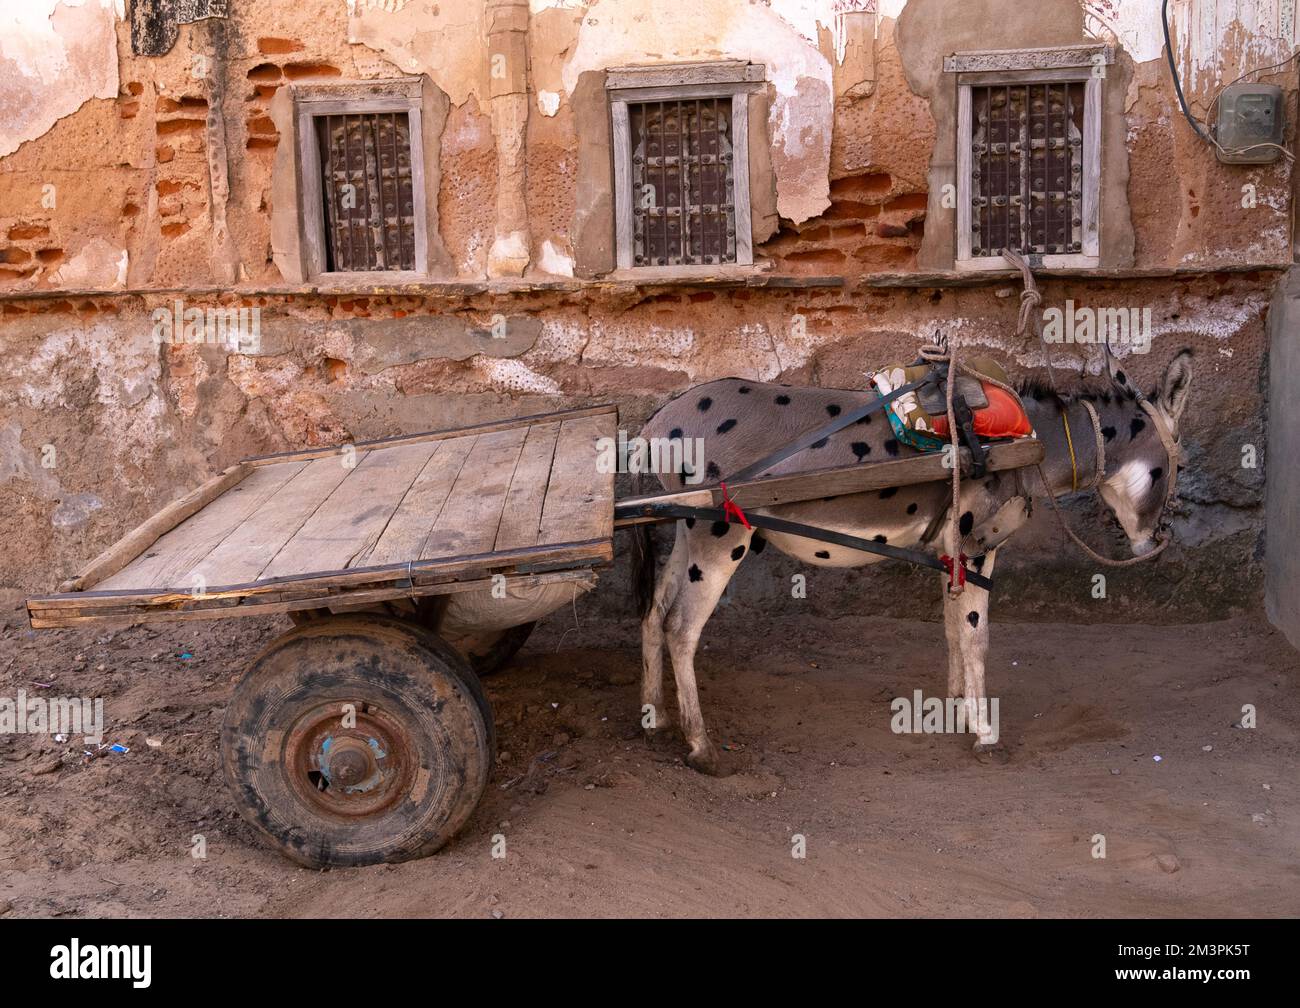 Decorated donkey with a cart, Rajasthan, Fatehpur, India Stock Photo